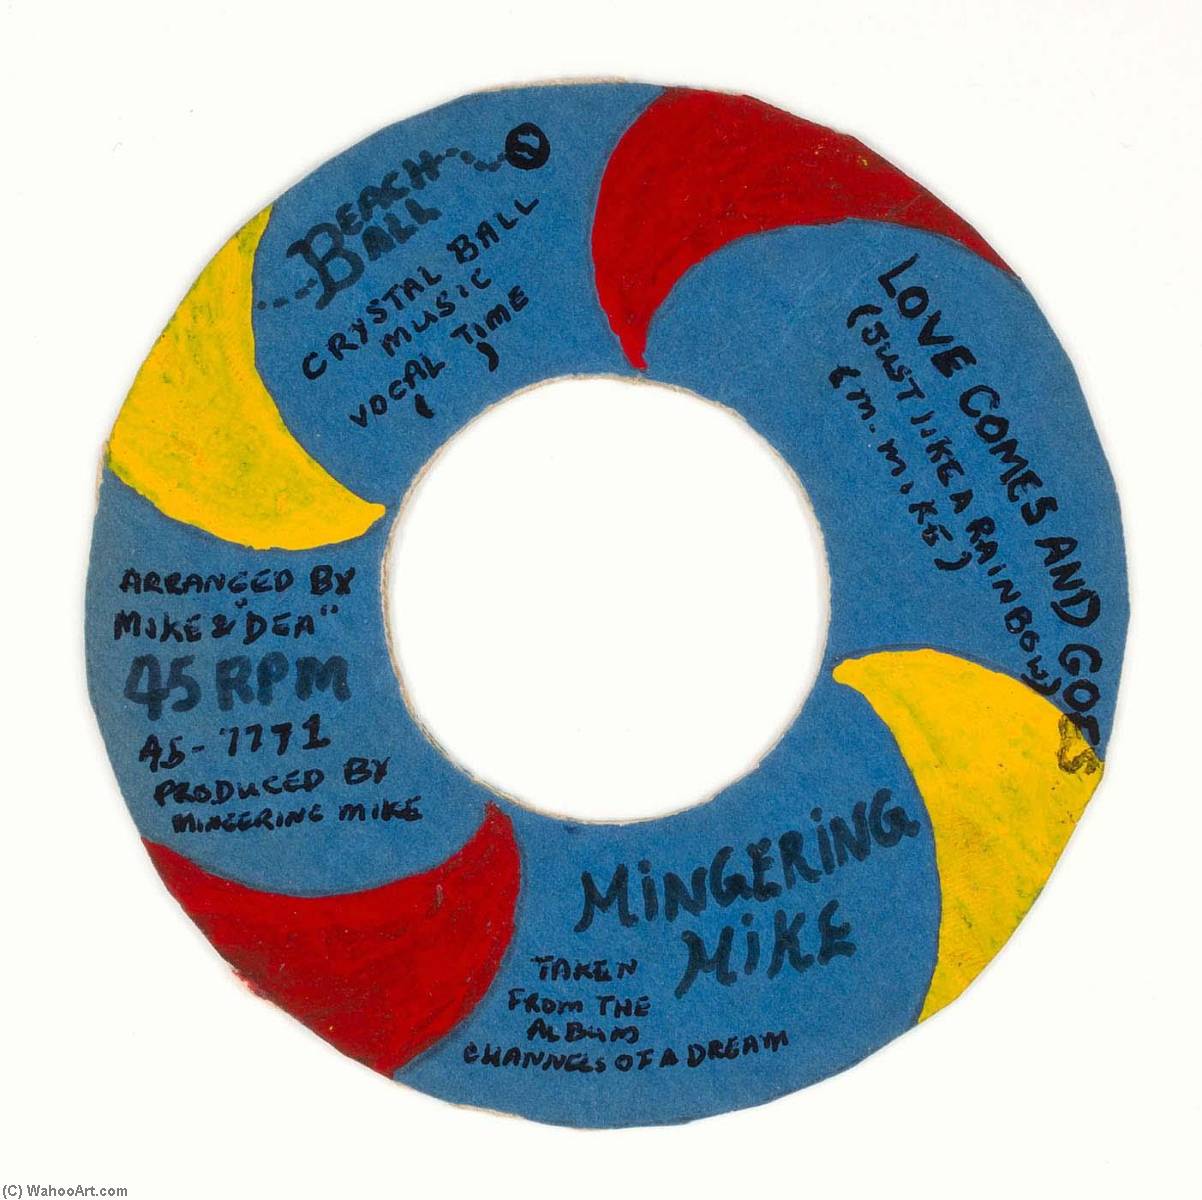 WikiOO.org - Encyclopedia of Fine Arts - Lukisan, Artwork Mingering Mike - BEACH BALL LOVE COMES AND GOES (JUST LIKE A RAINBOW), MINGERING MIKE